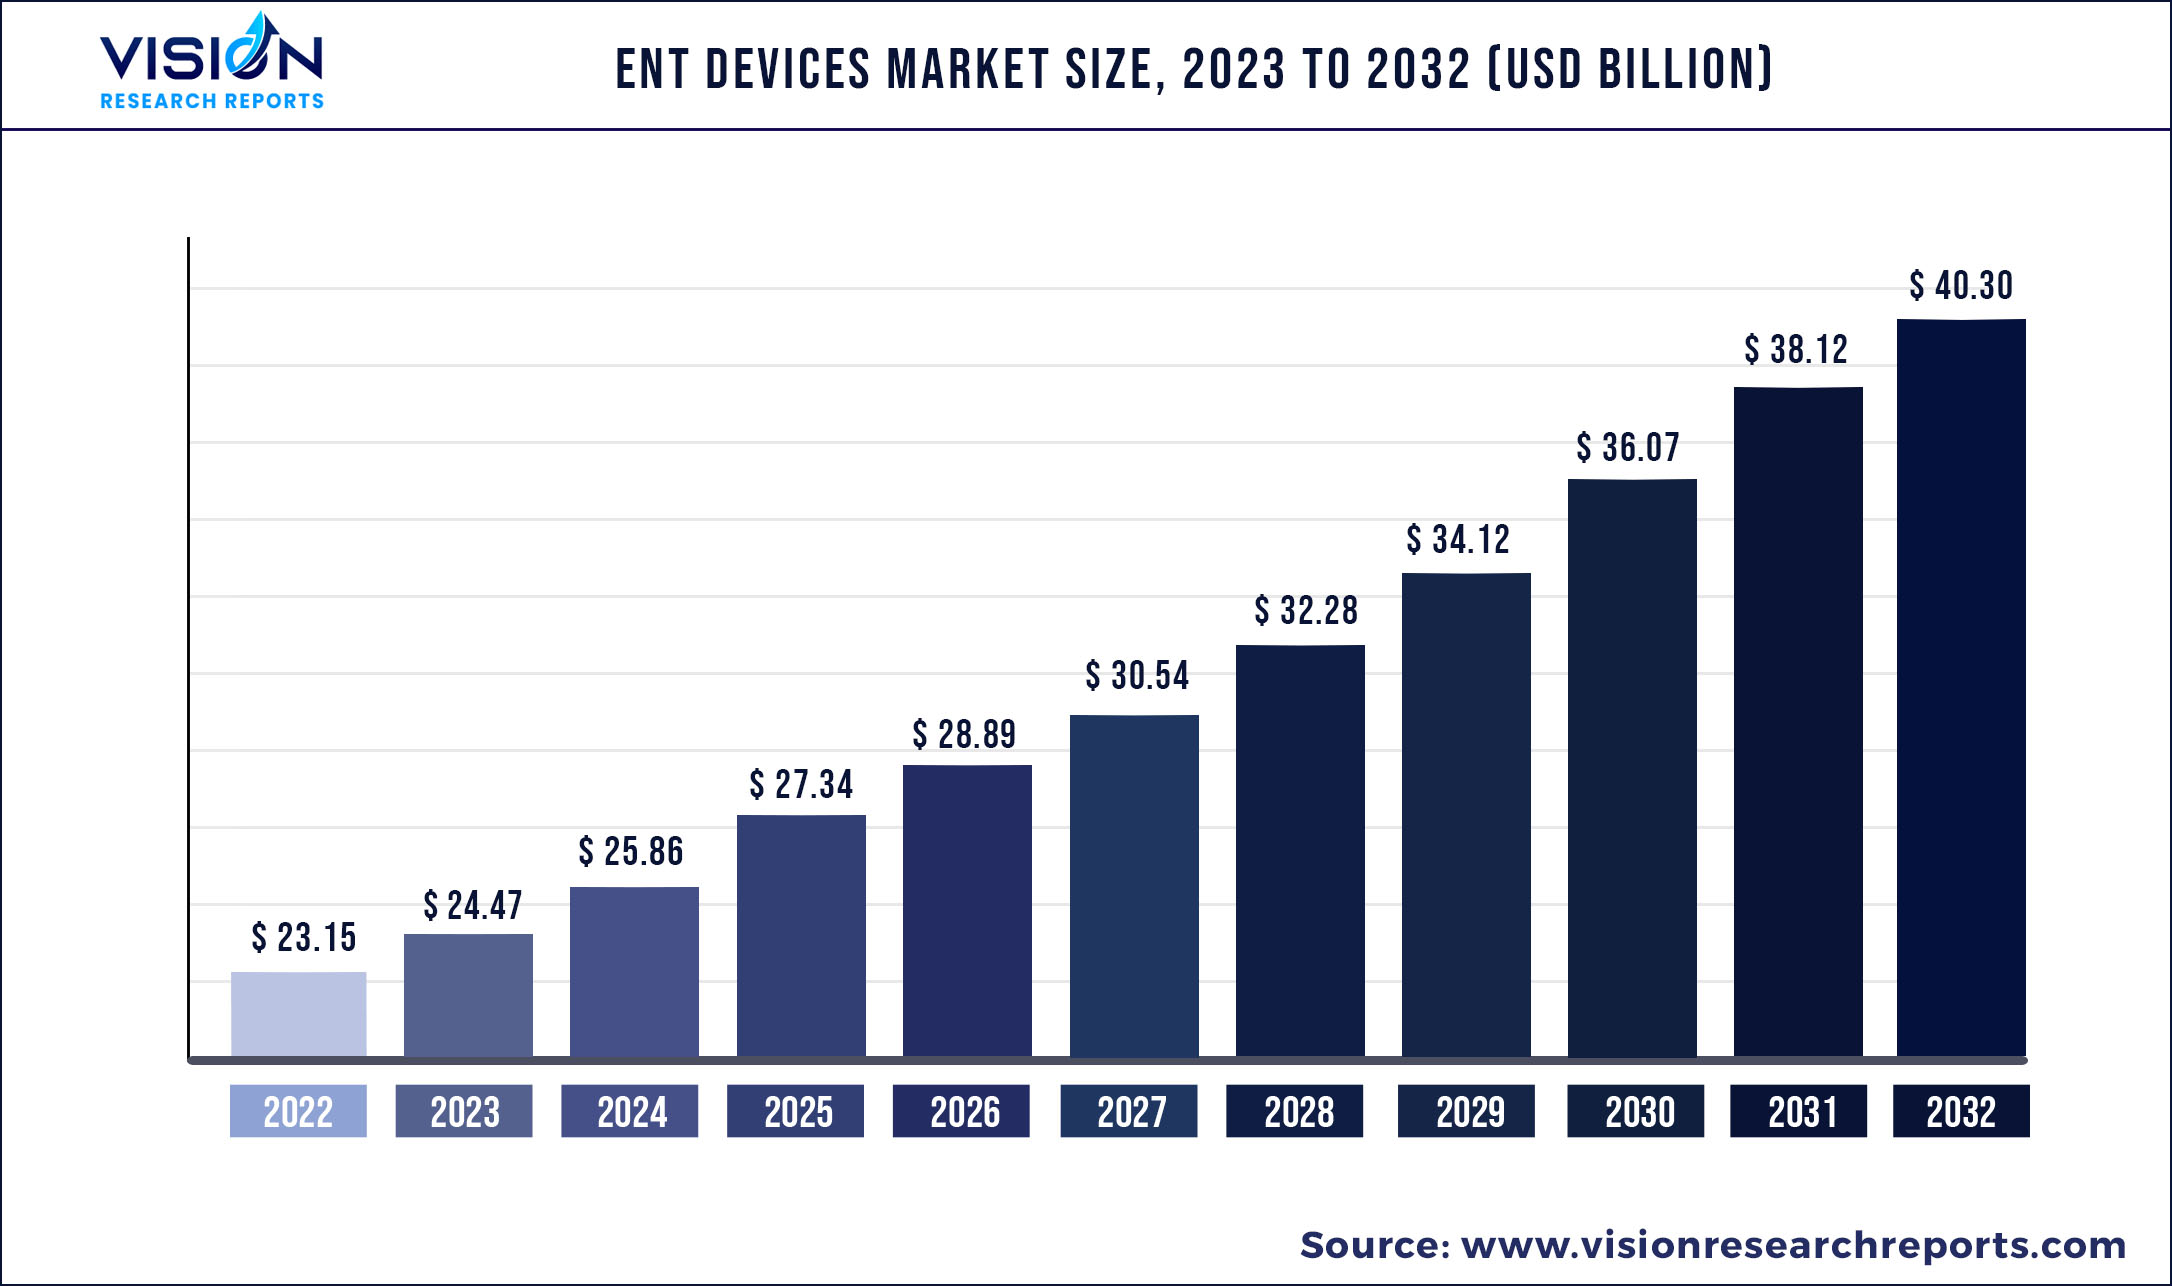 ENT Devices Market Size 2023 to 2032